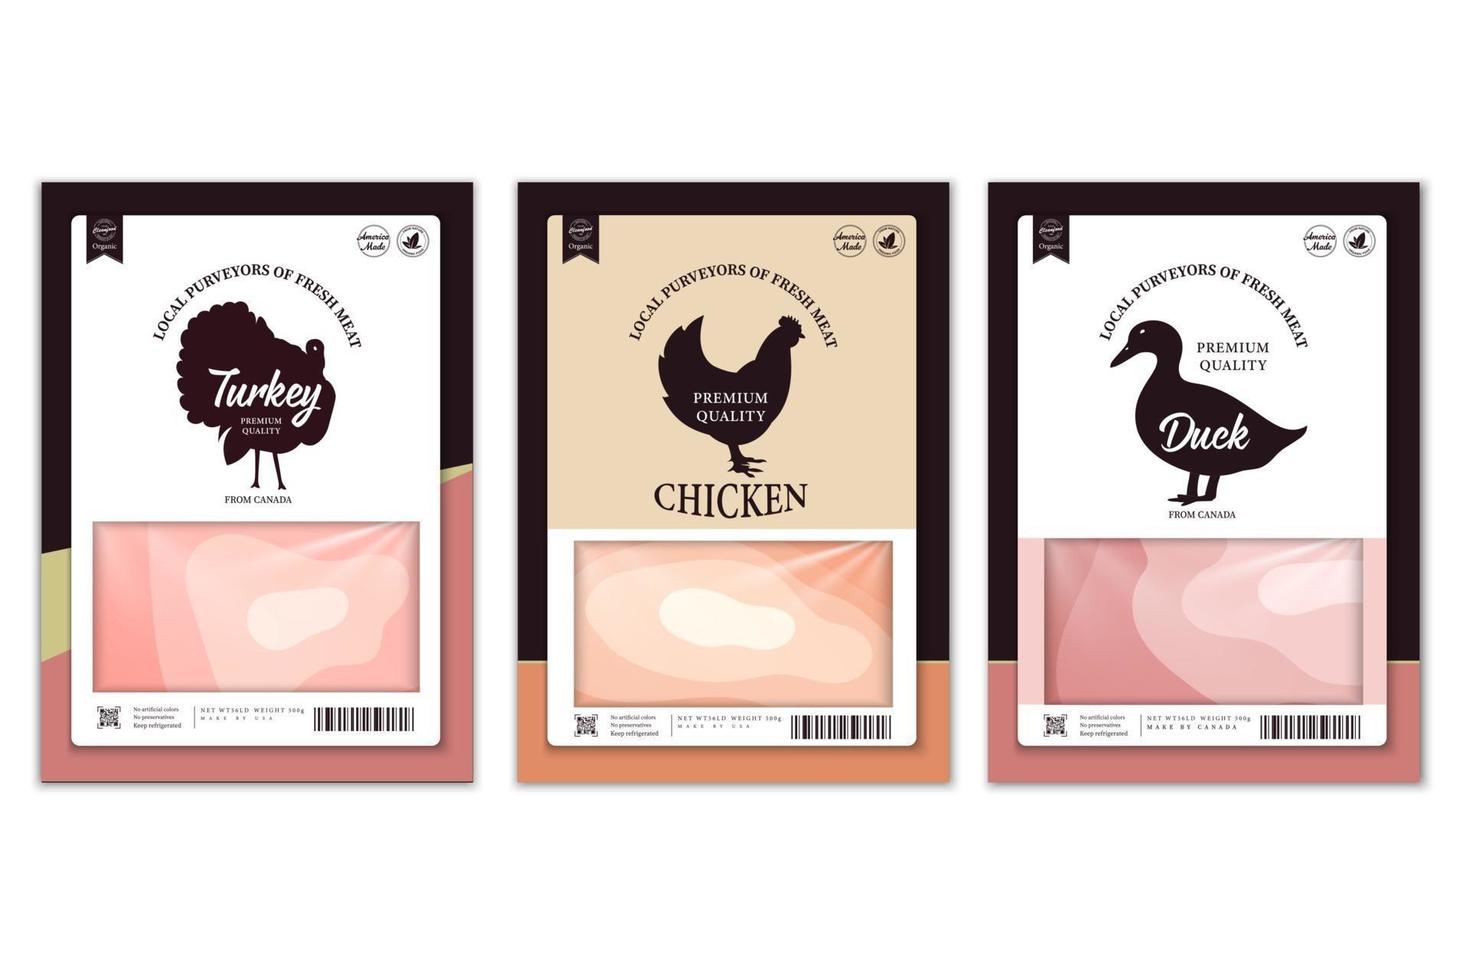 Butchery with farm animal. Chicken, turkey and duck meat for groceries vector